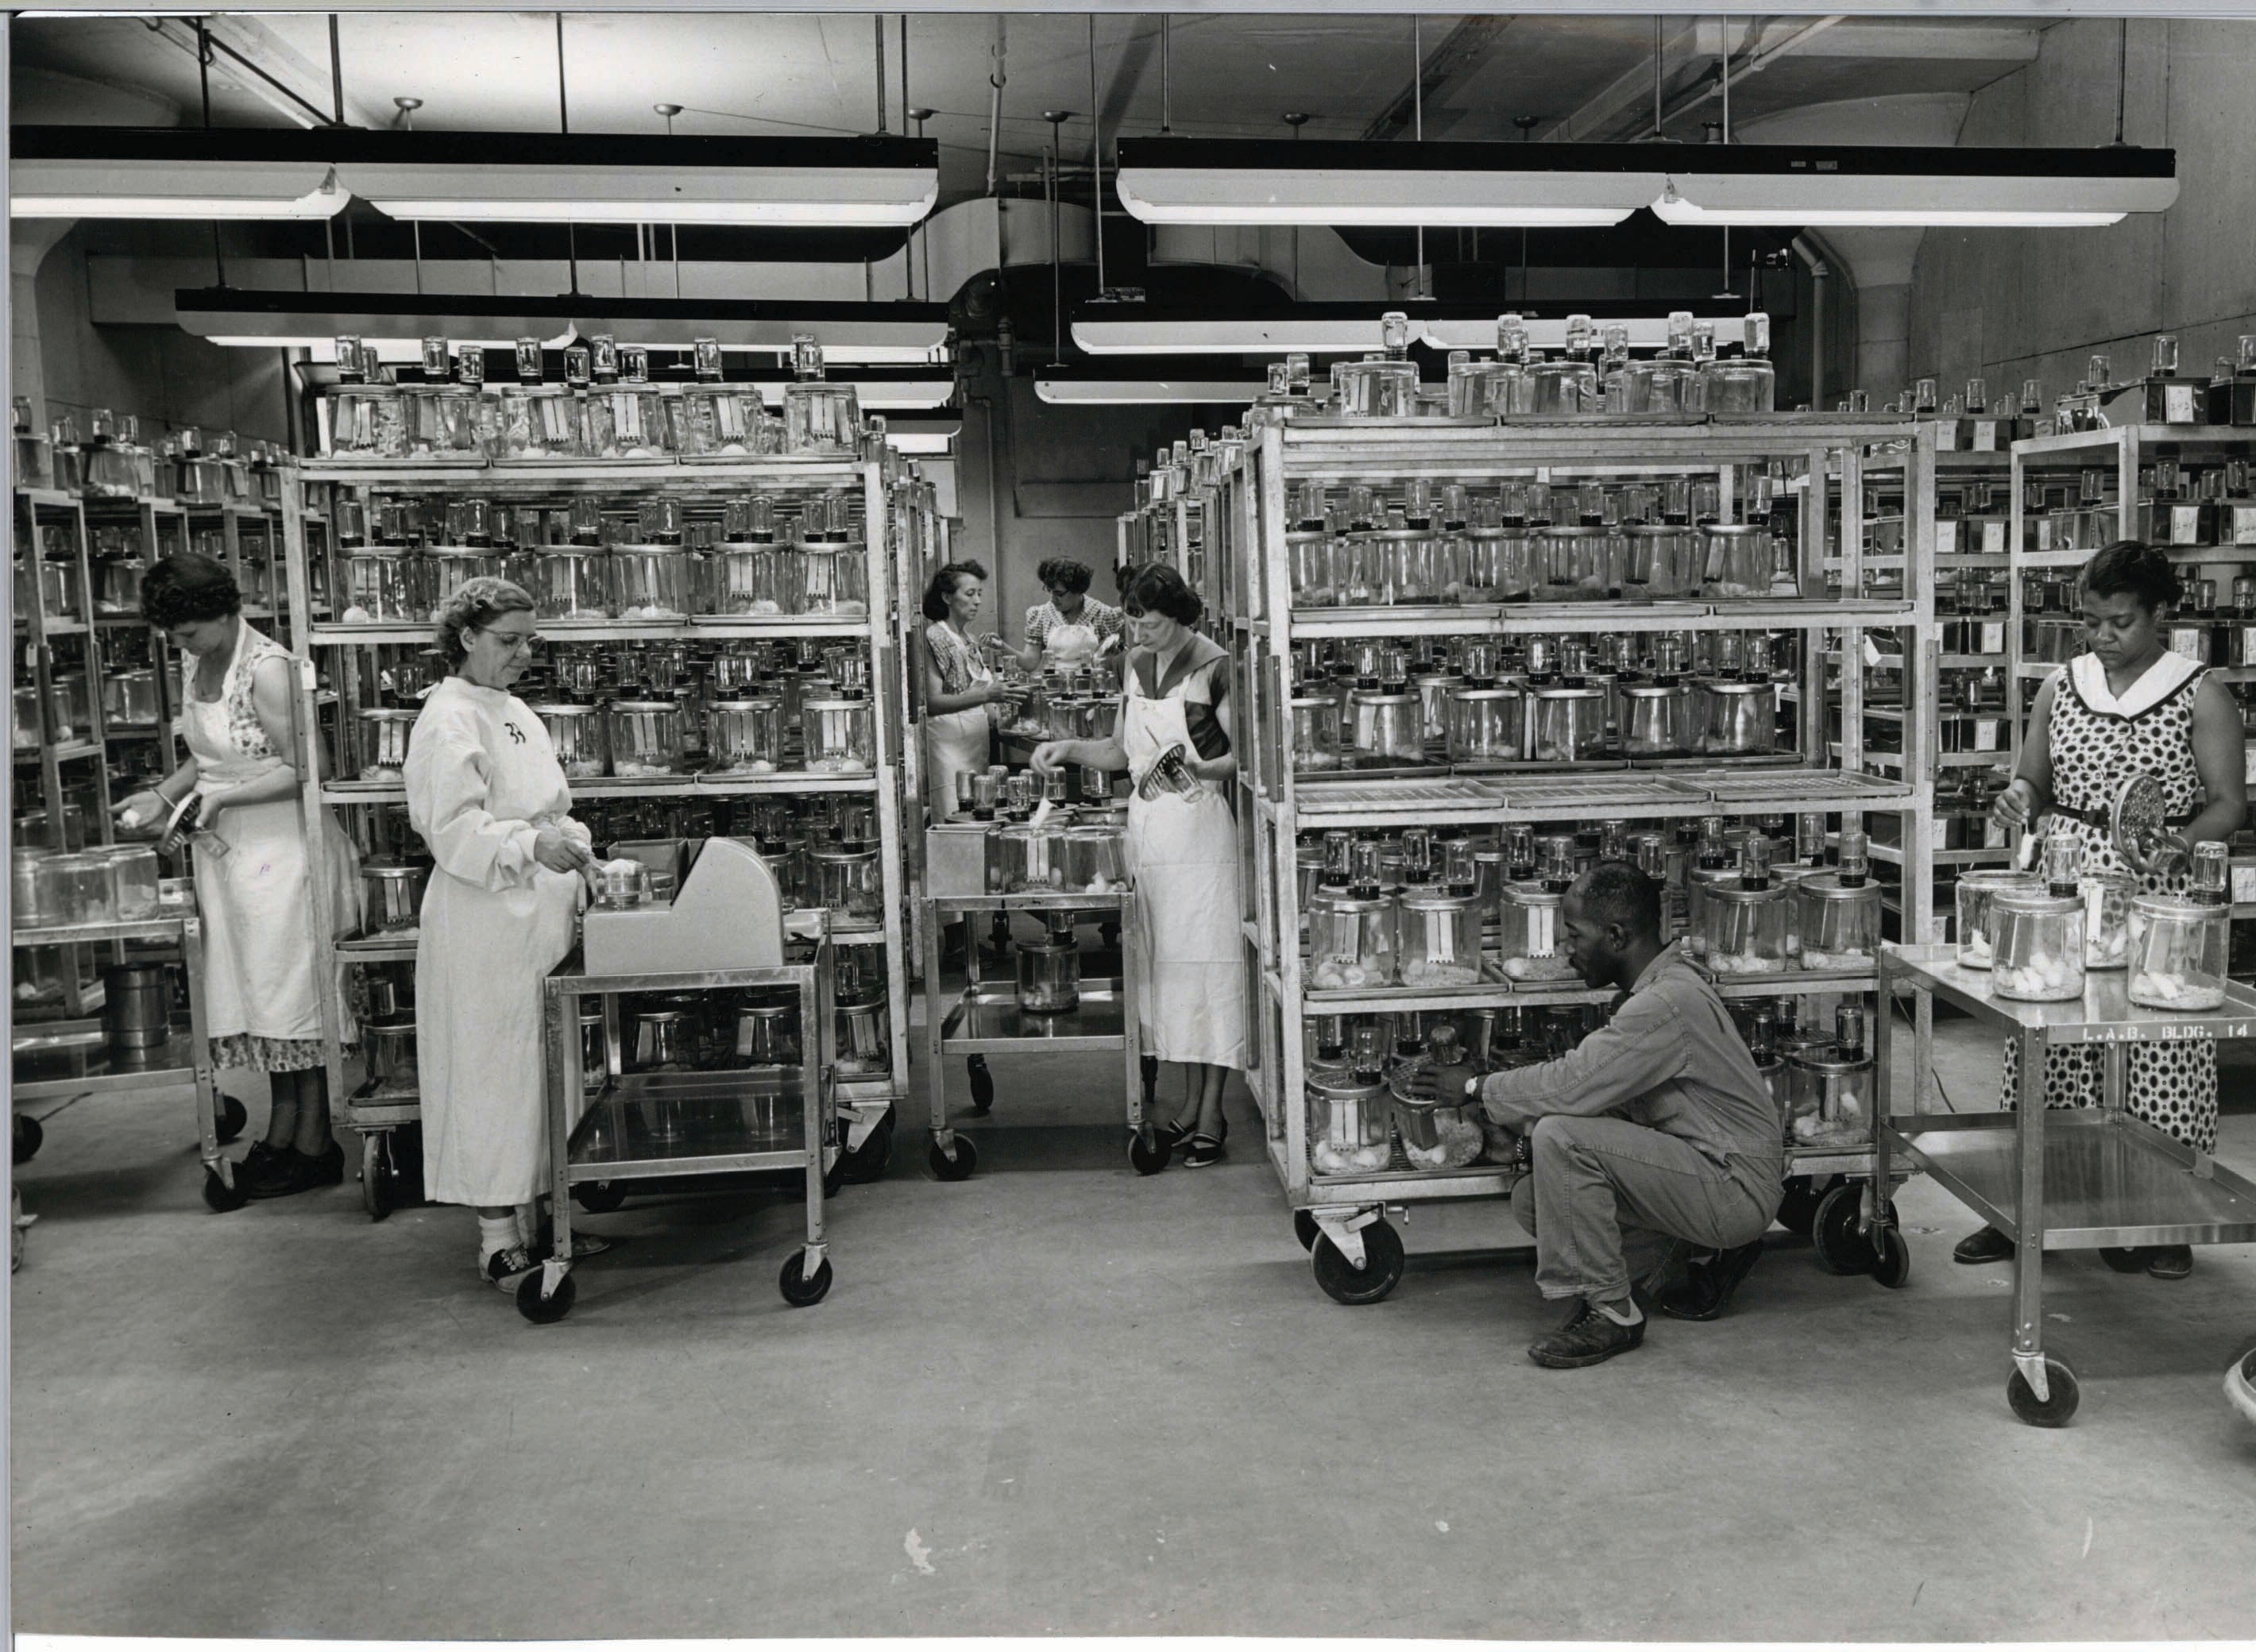 A laboratory in the fifties with lab workers and racks of mice in the background